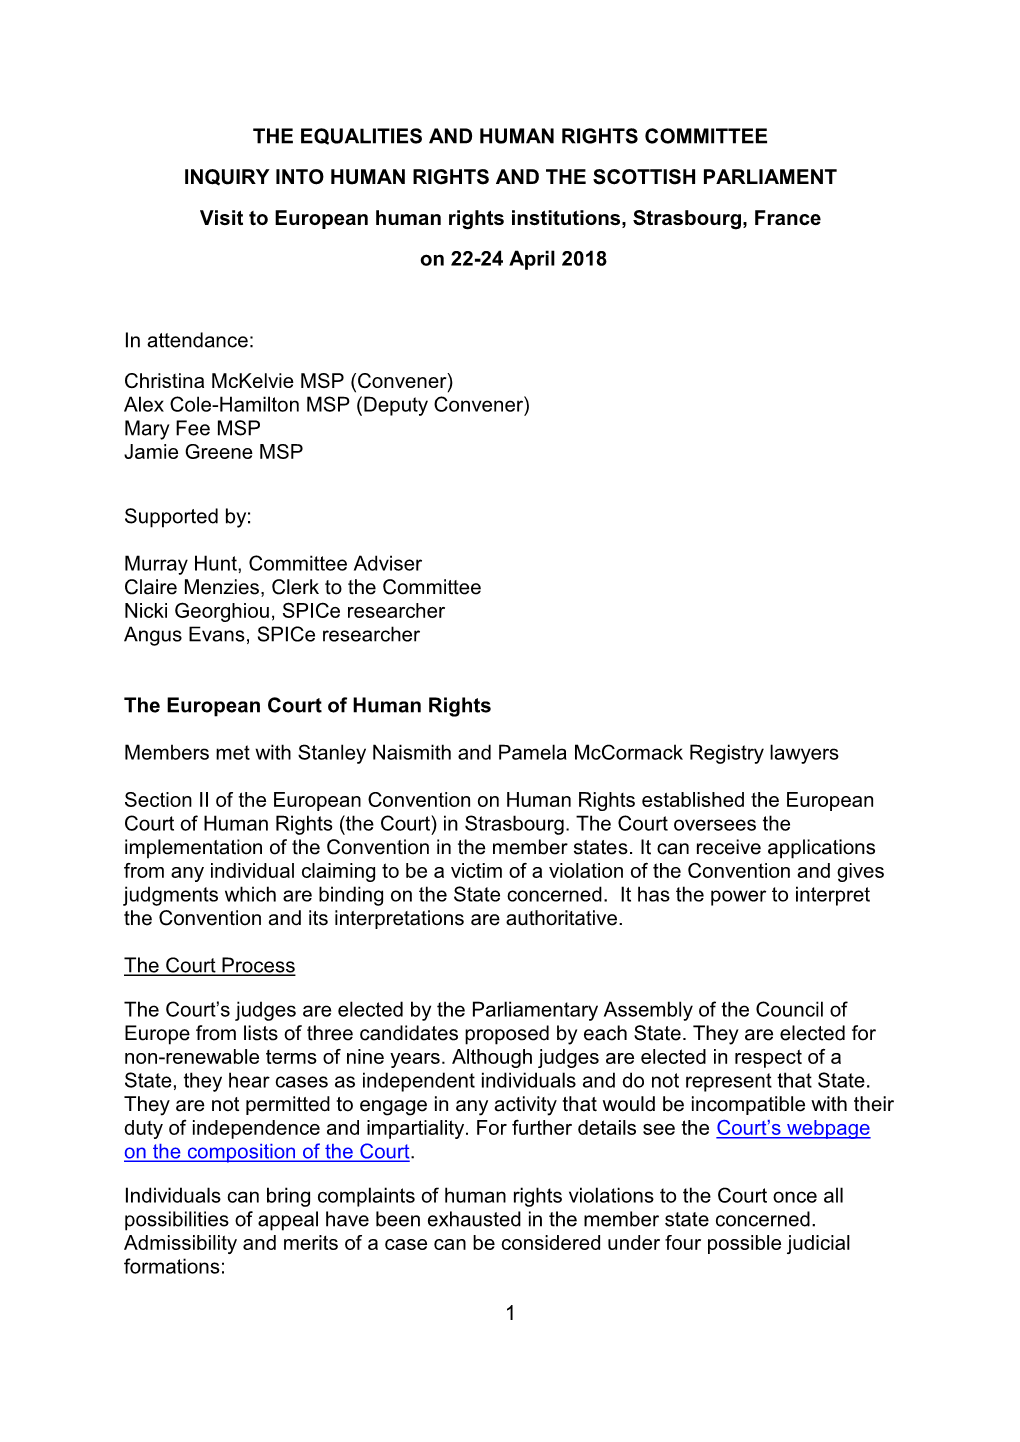 1 the Equalities and Human Rights Committee Inquiry